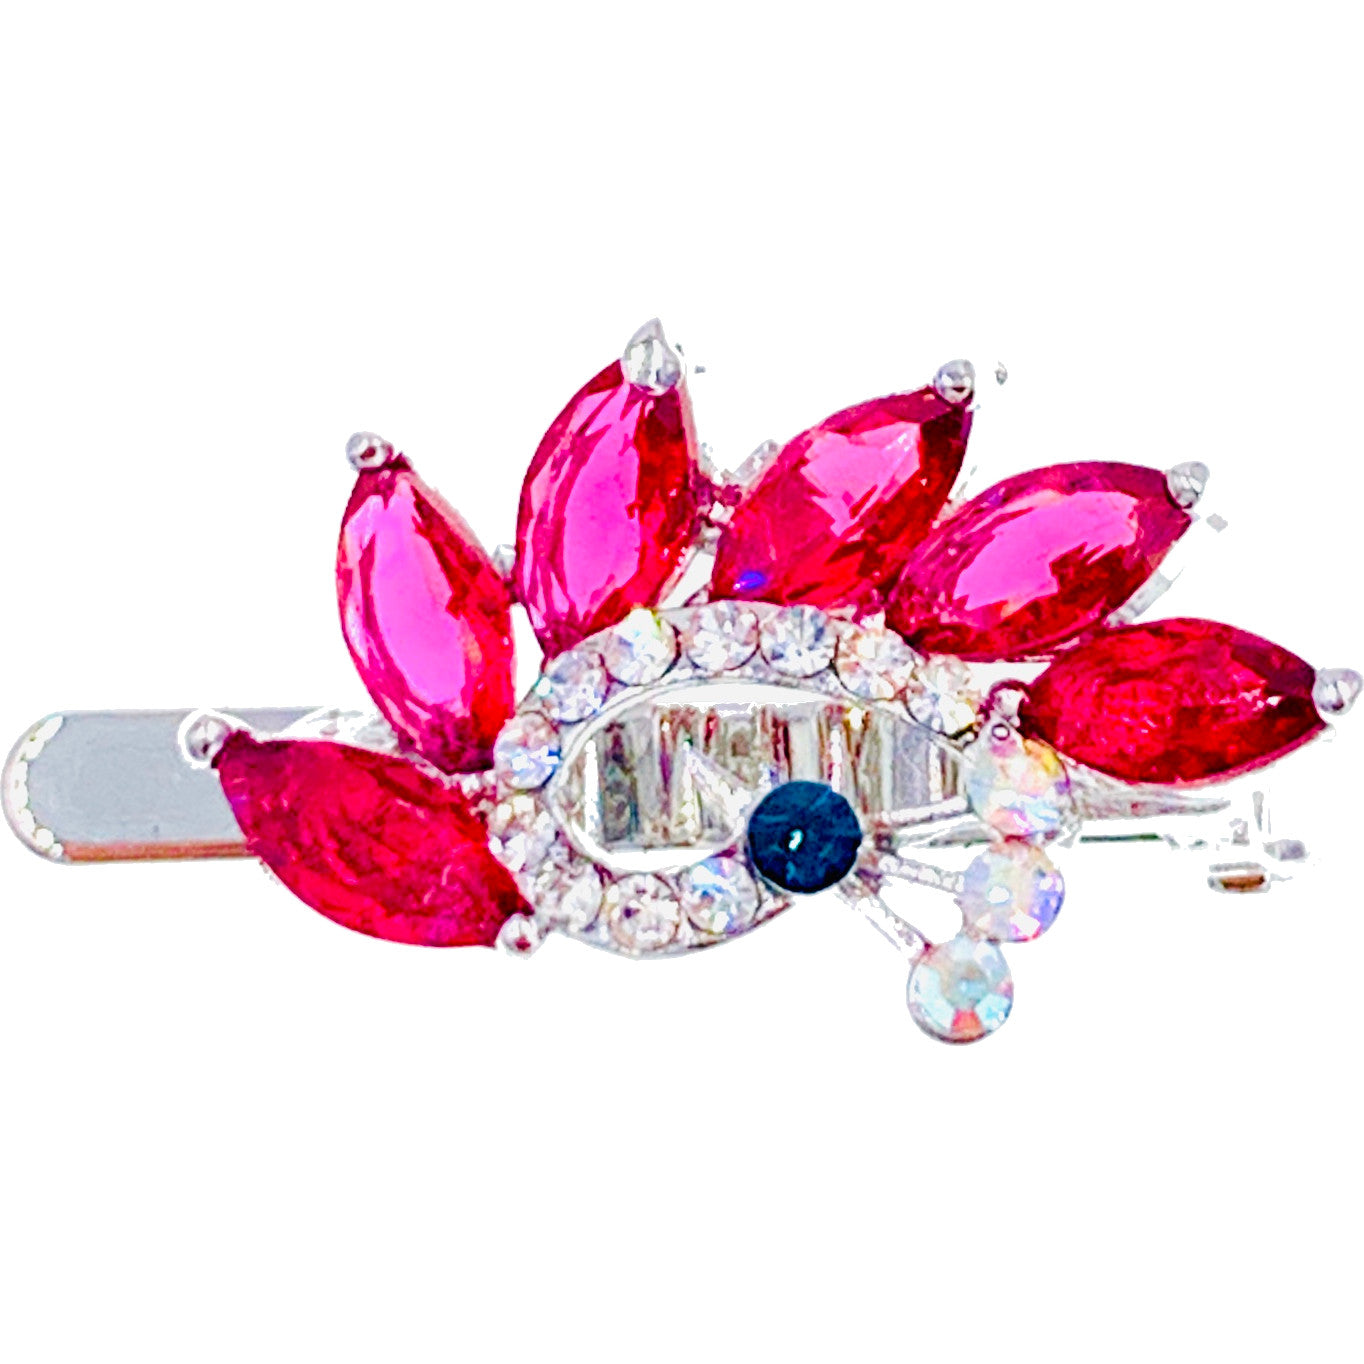 Peacock Magnetic Hair Clip use Swarovski ELM & Cubic Zirconia Crystals Hairpin Barrette, Magnetic Clip - MOGHANT